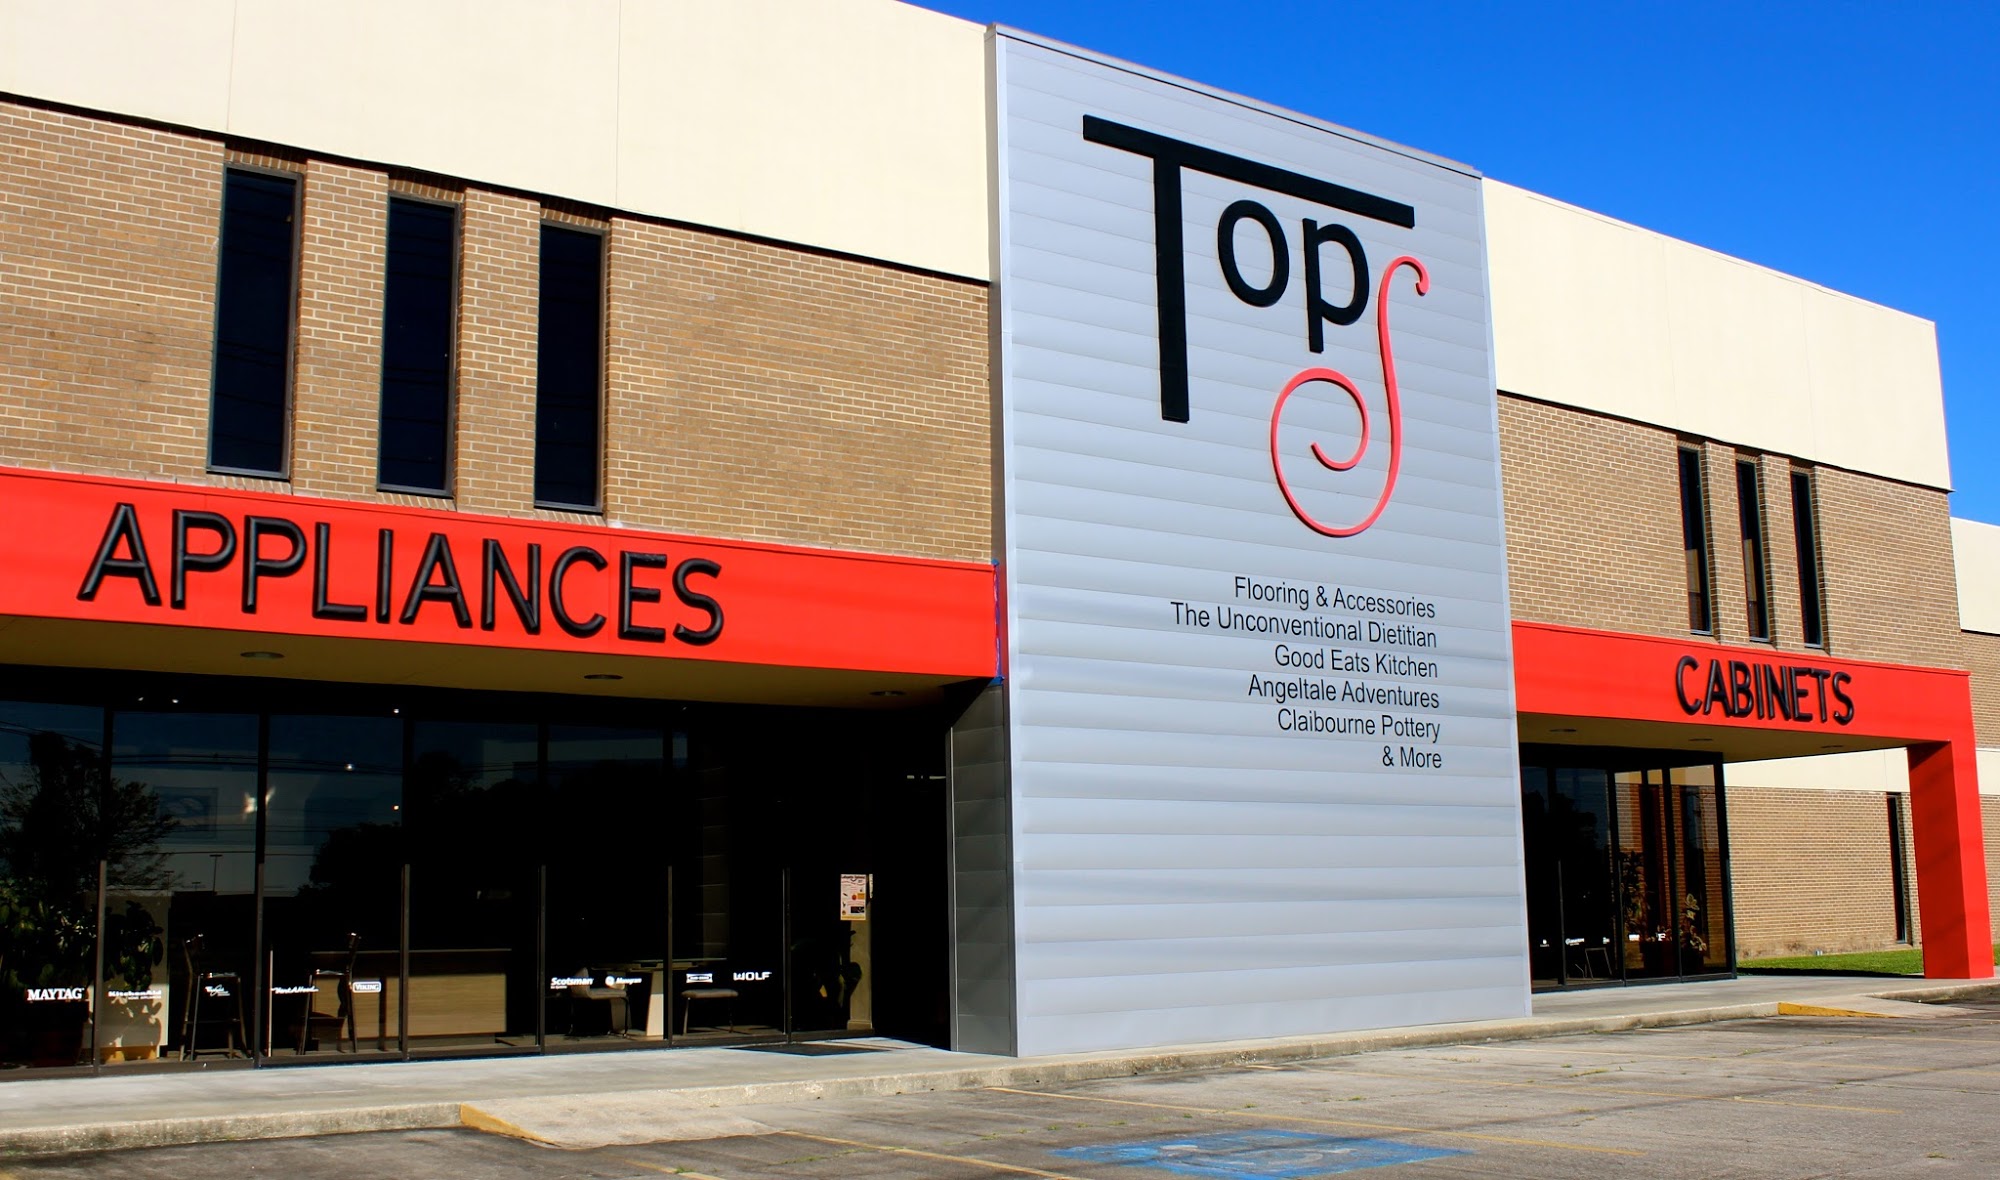 Tops Appliances & Cabinetry